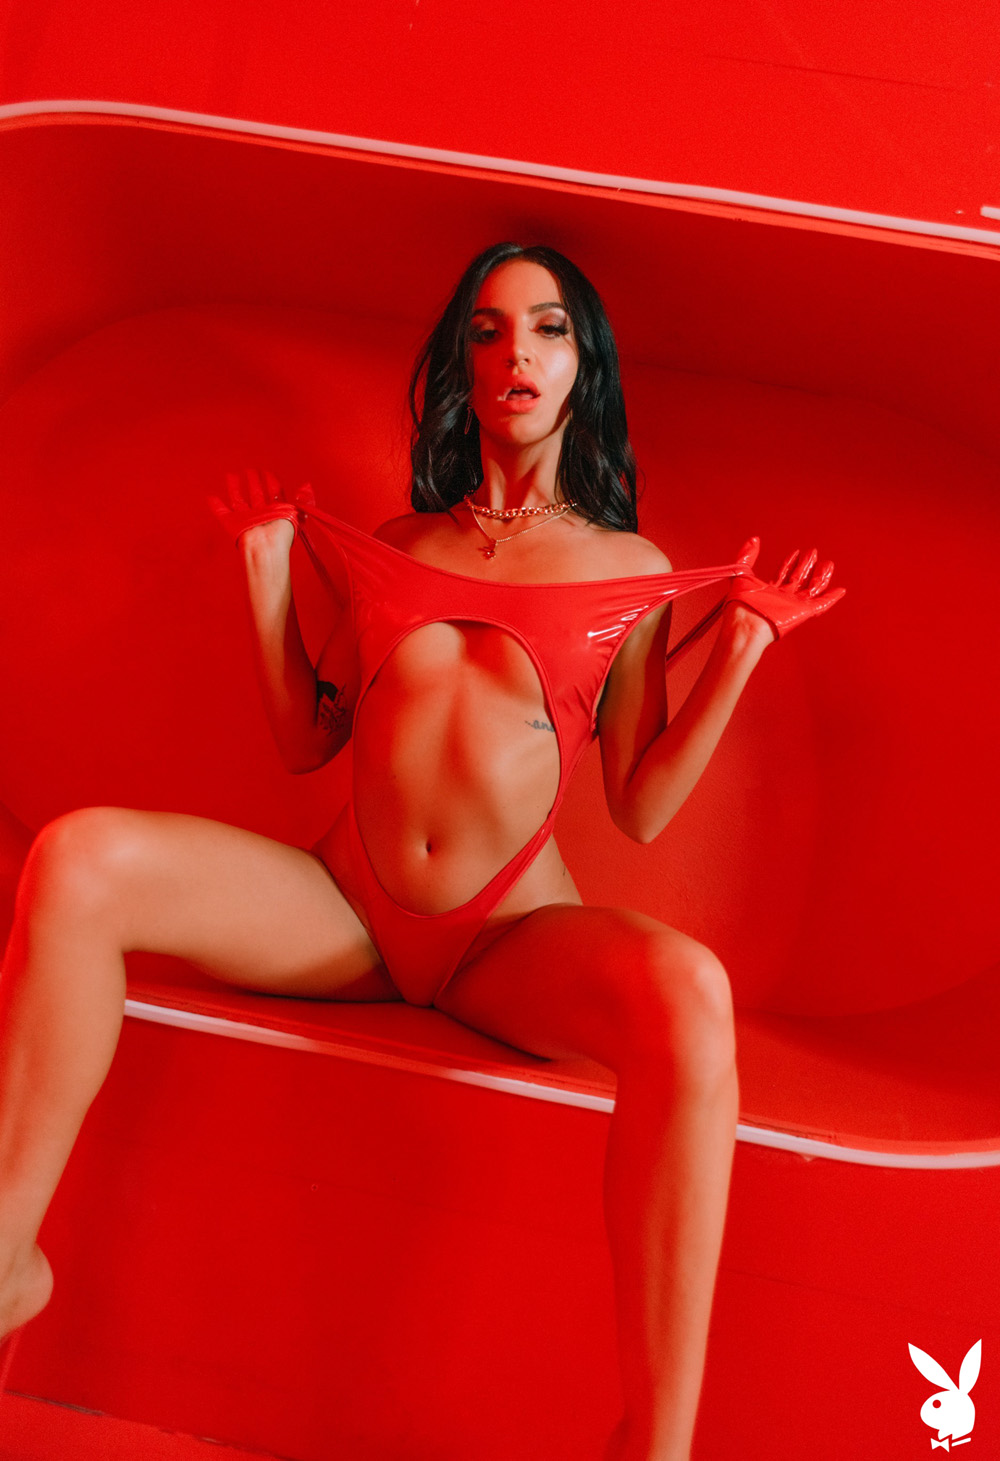 Ashlyn Chere exposes her exquisite beauty in the red room